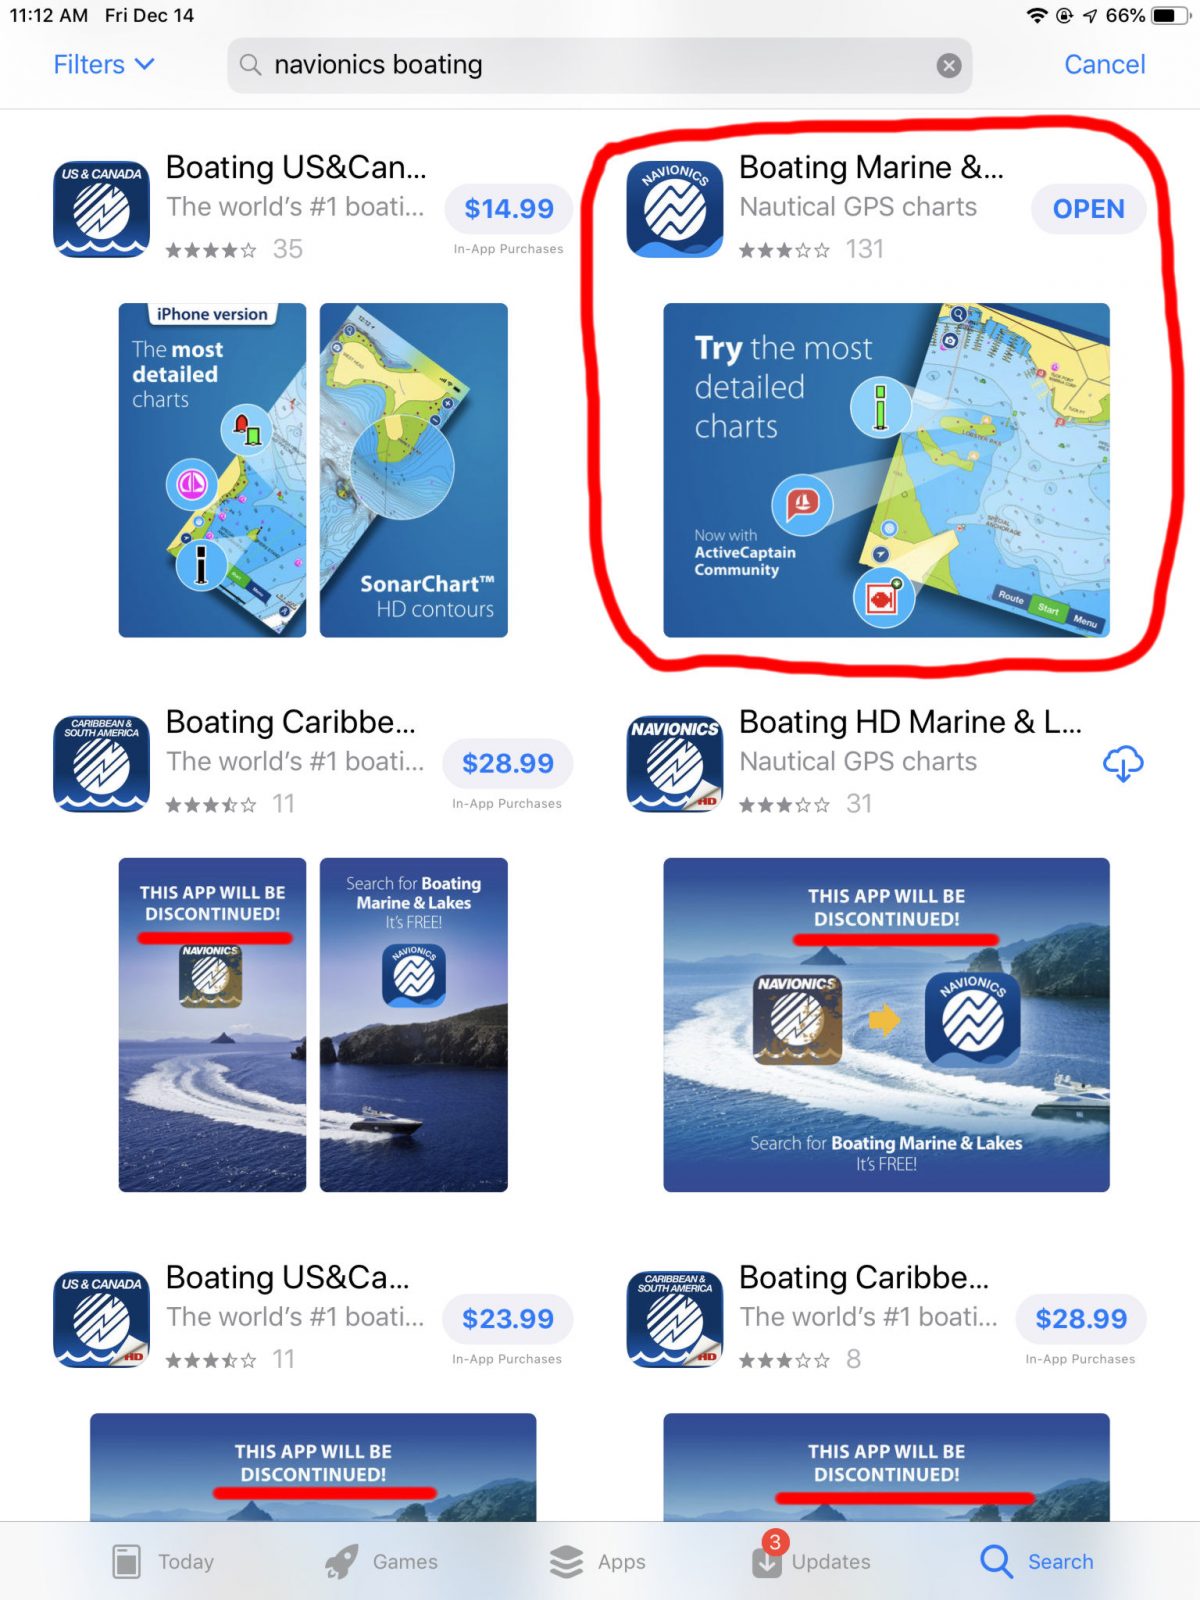 do you have to pay for navionics android app every year